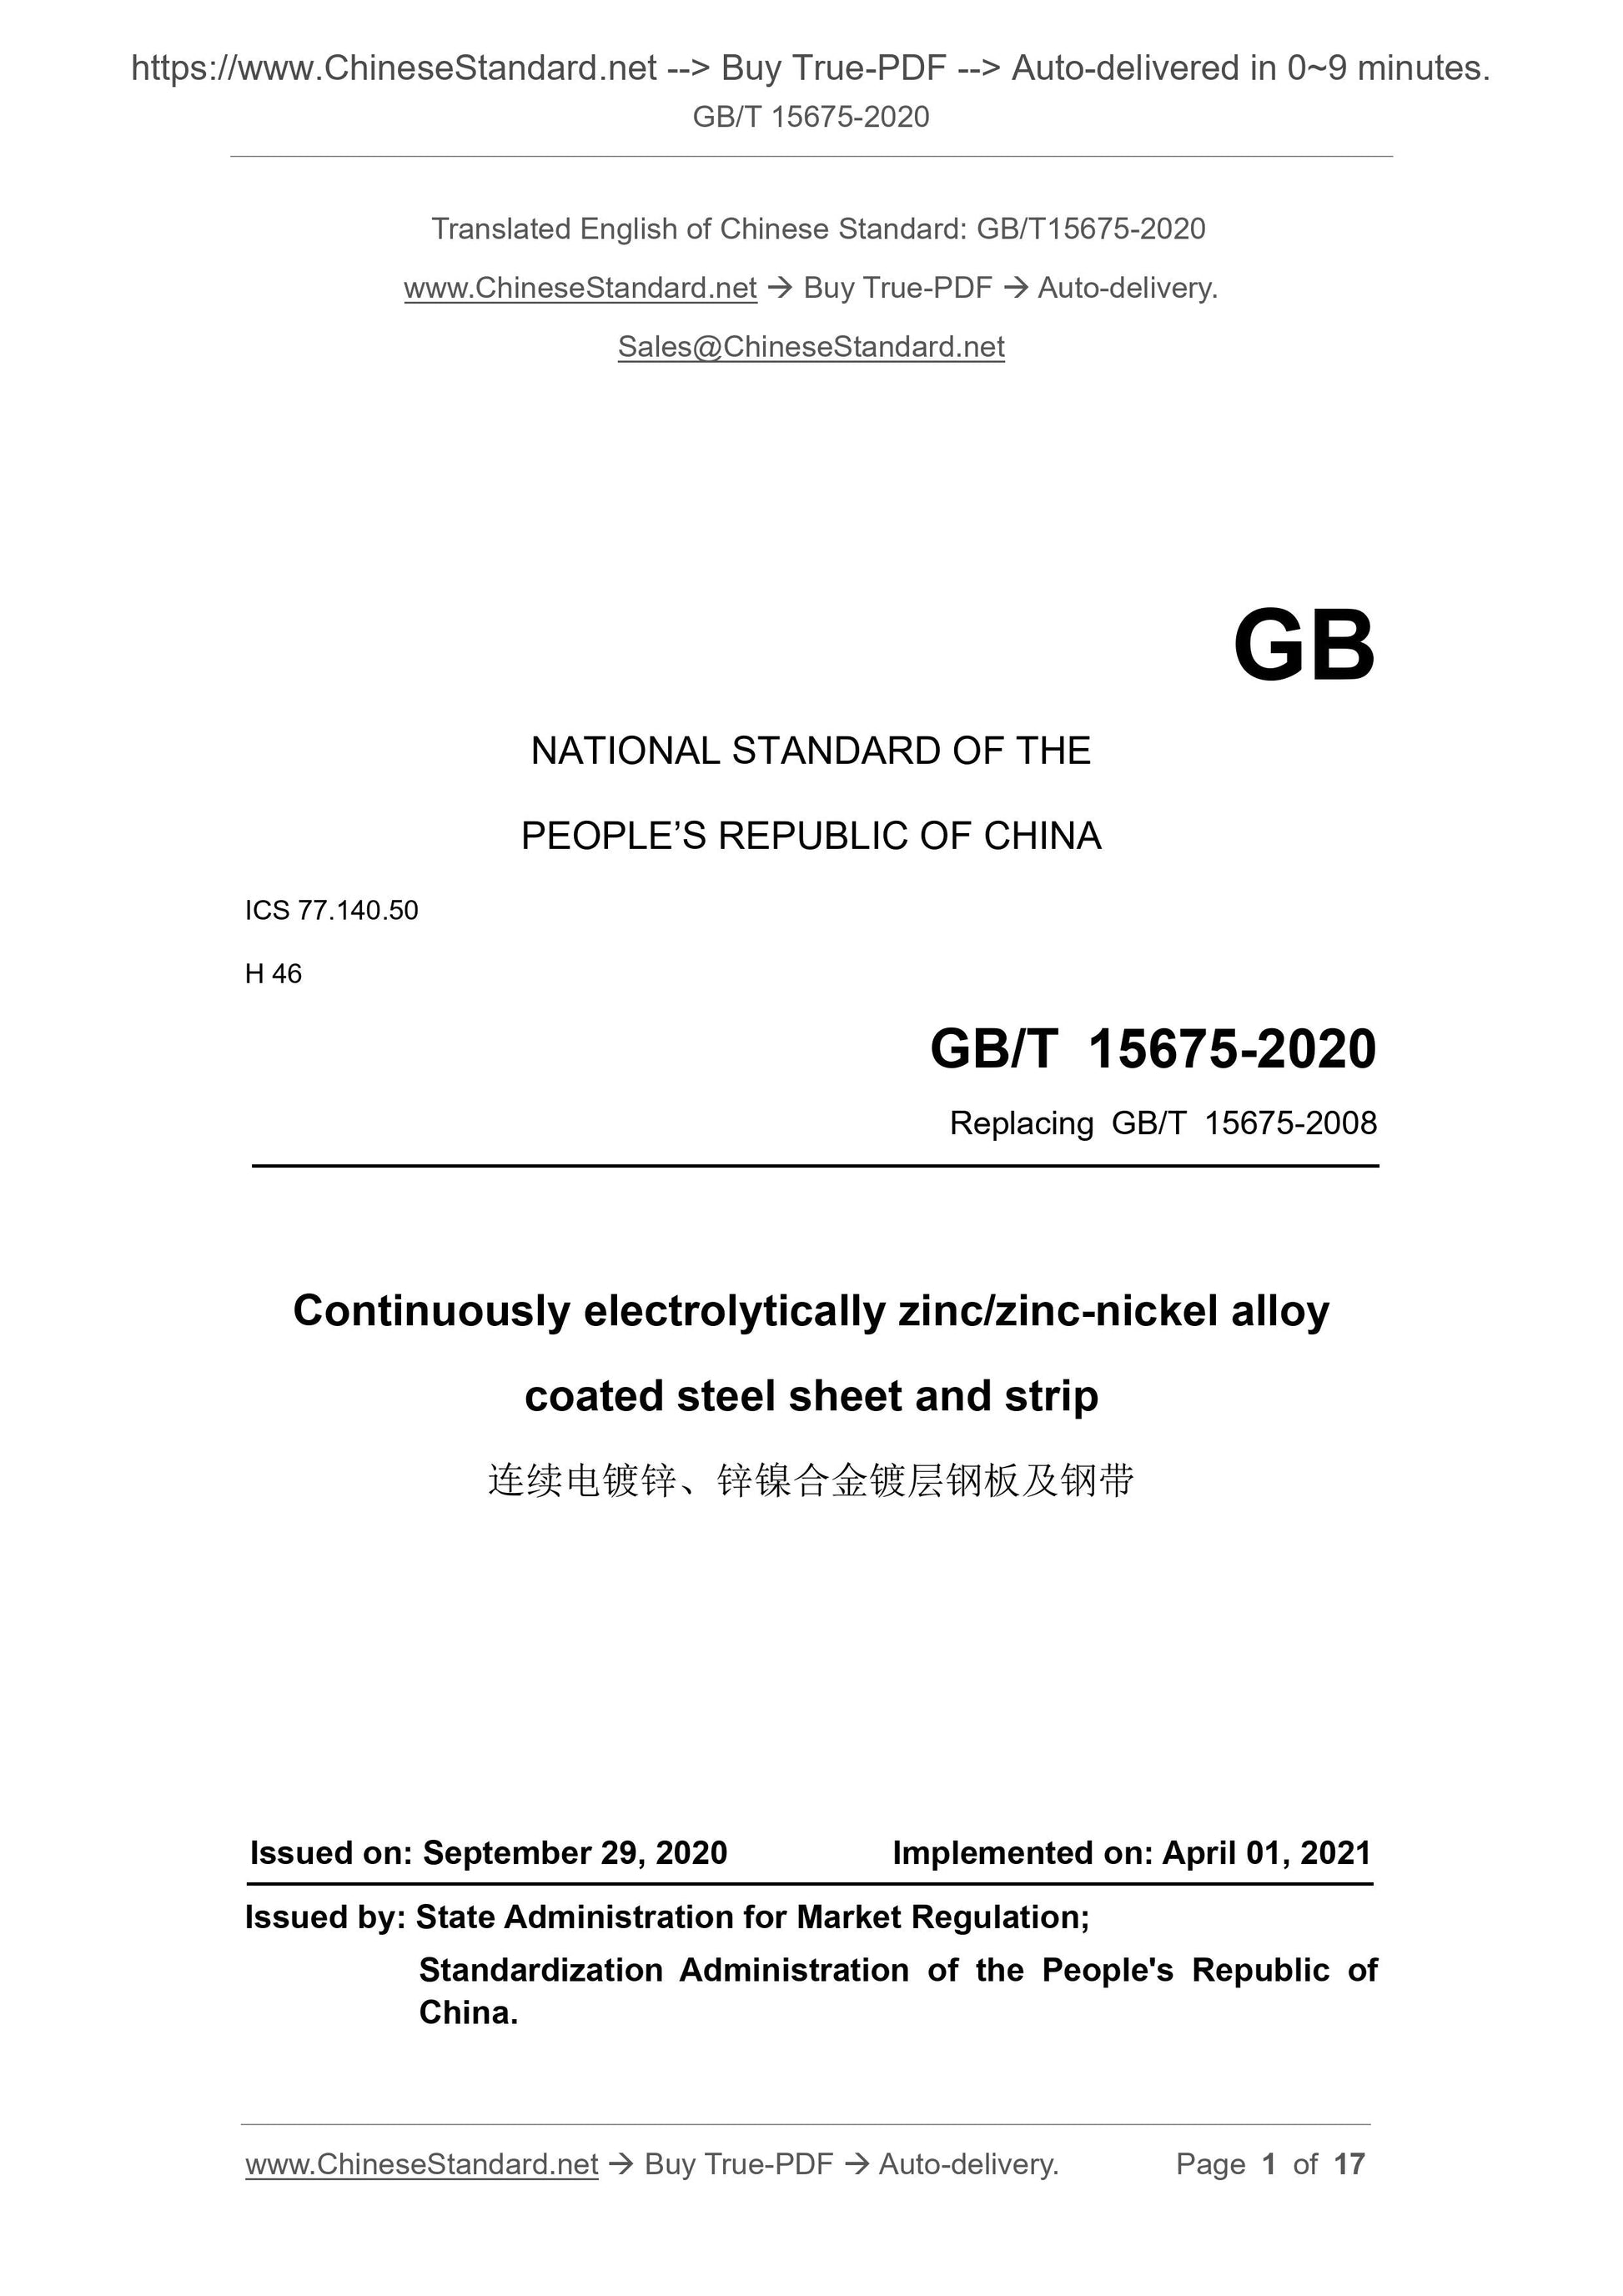 GB/T 15675-2020 Page 1